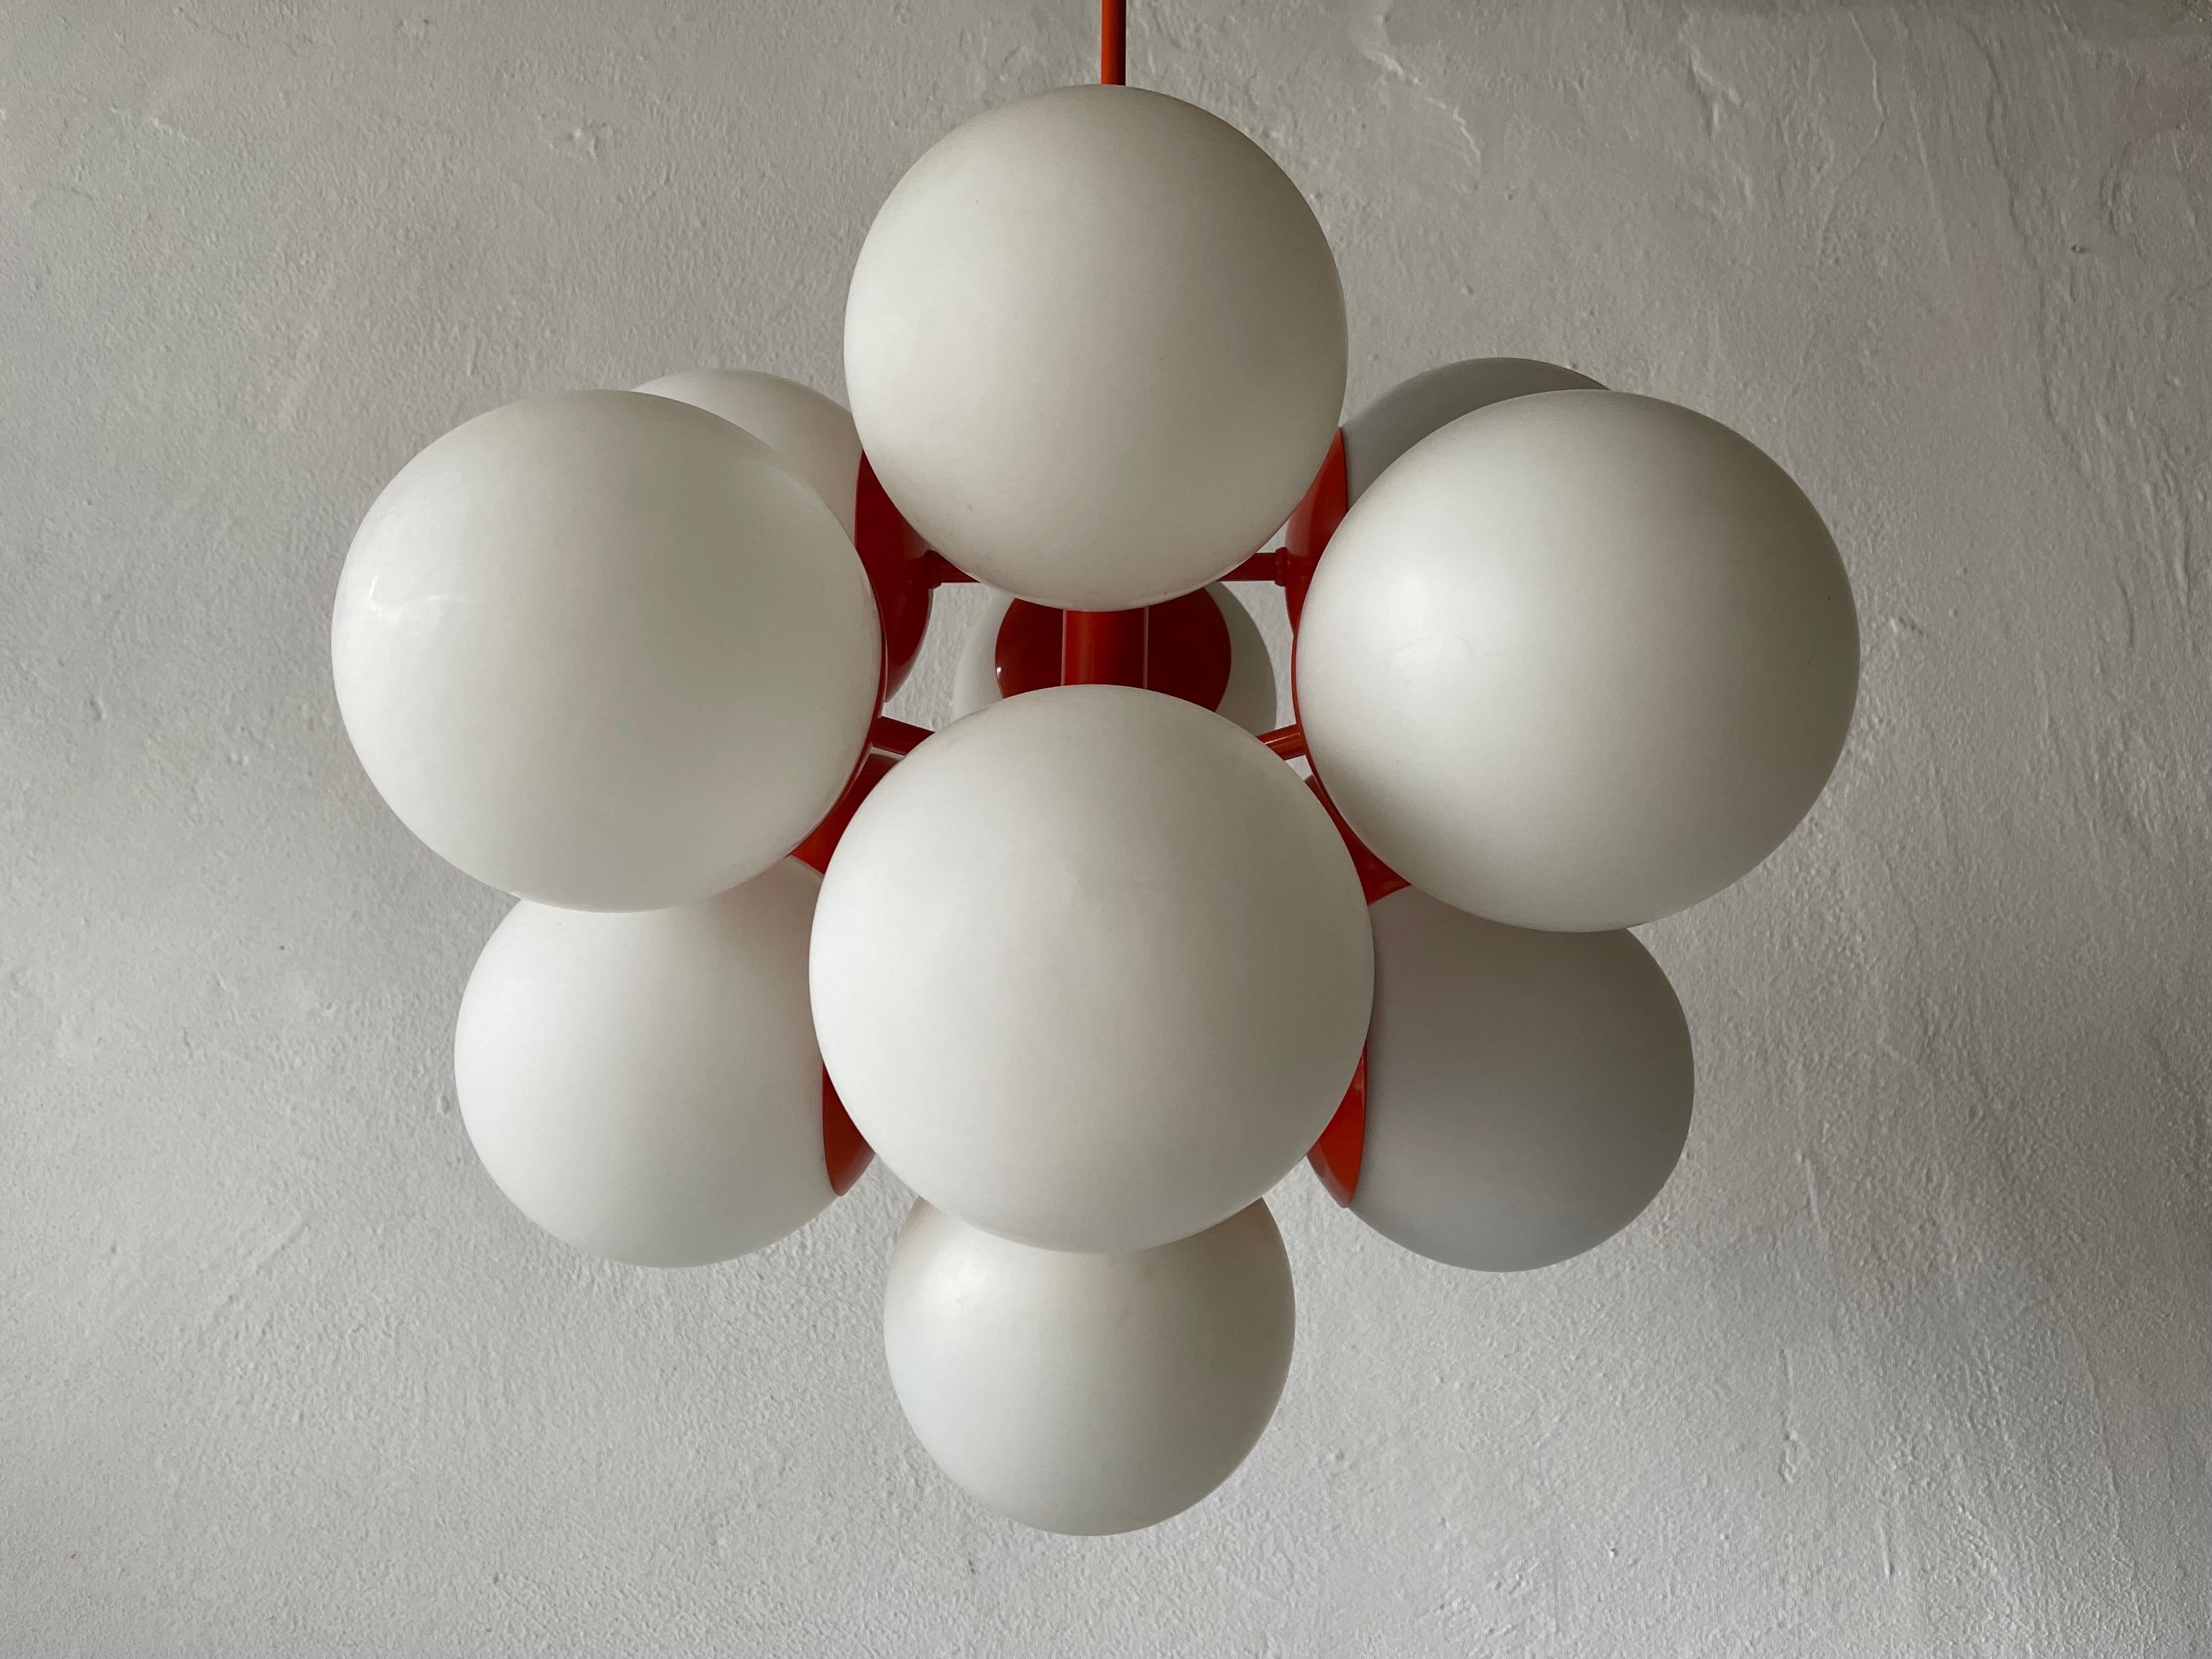 Space Age 13 Balls Orange Chandelier by Kaiser Leuchten, 1970s, Germany

Fantastic 3 opal ball glass atomic age pendant lamp

Lampshade is in good condition and very clean. 
This lamp works with 13 x E14 light bulb. 
Wired and suitable to use